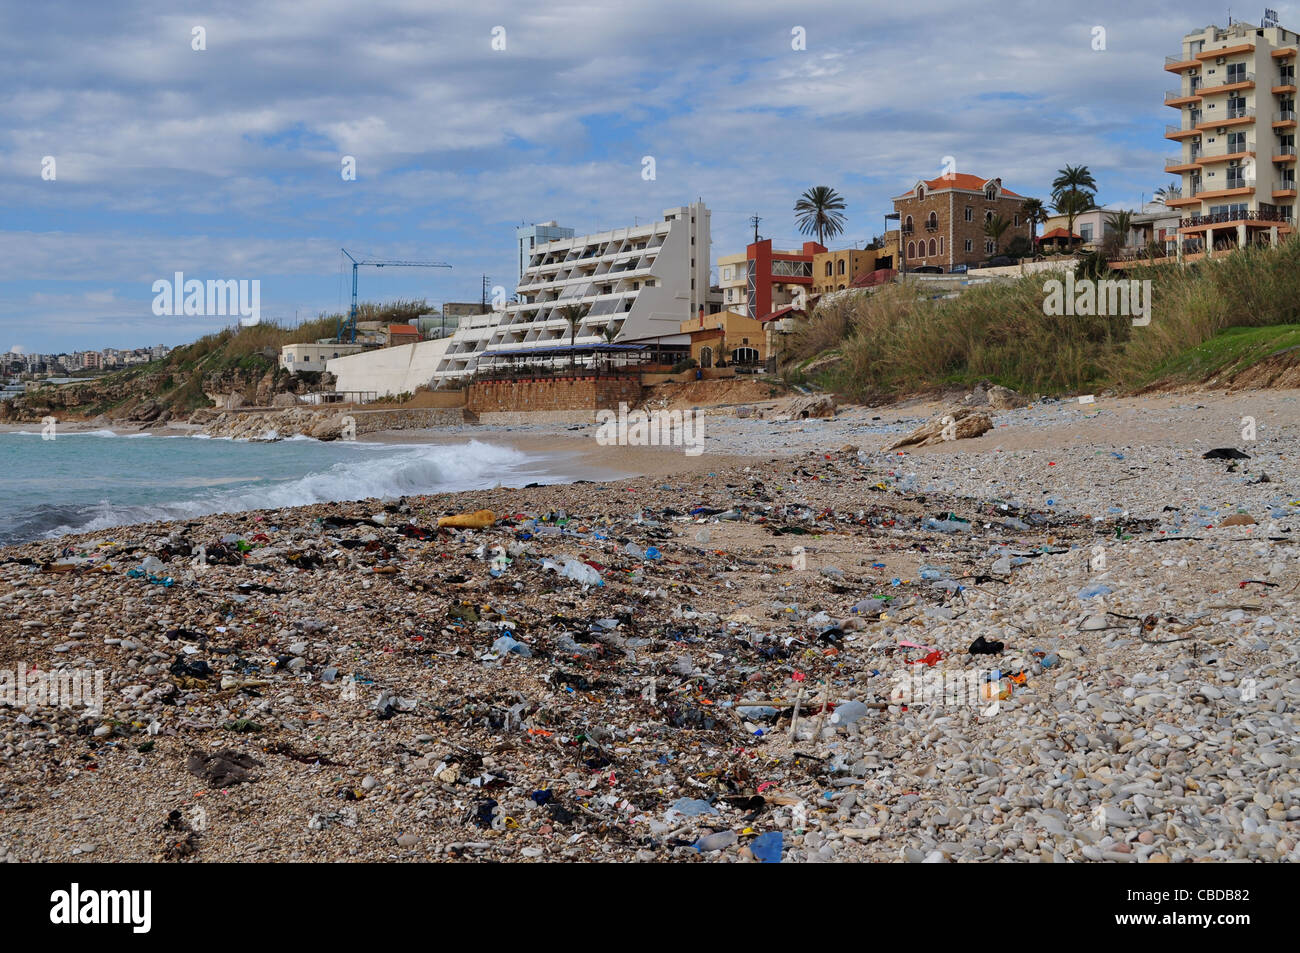 Litter strewn, pre open season beach at Jbeil aka Byblos where hundreds of tourists  will soon throng and swim. Stock Photo